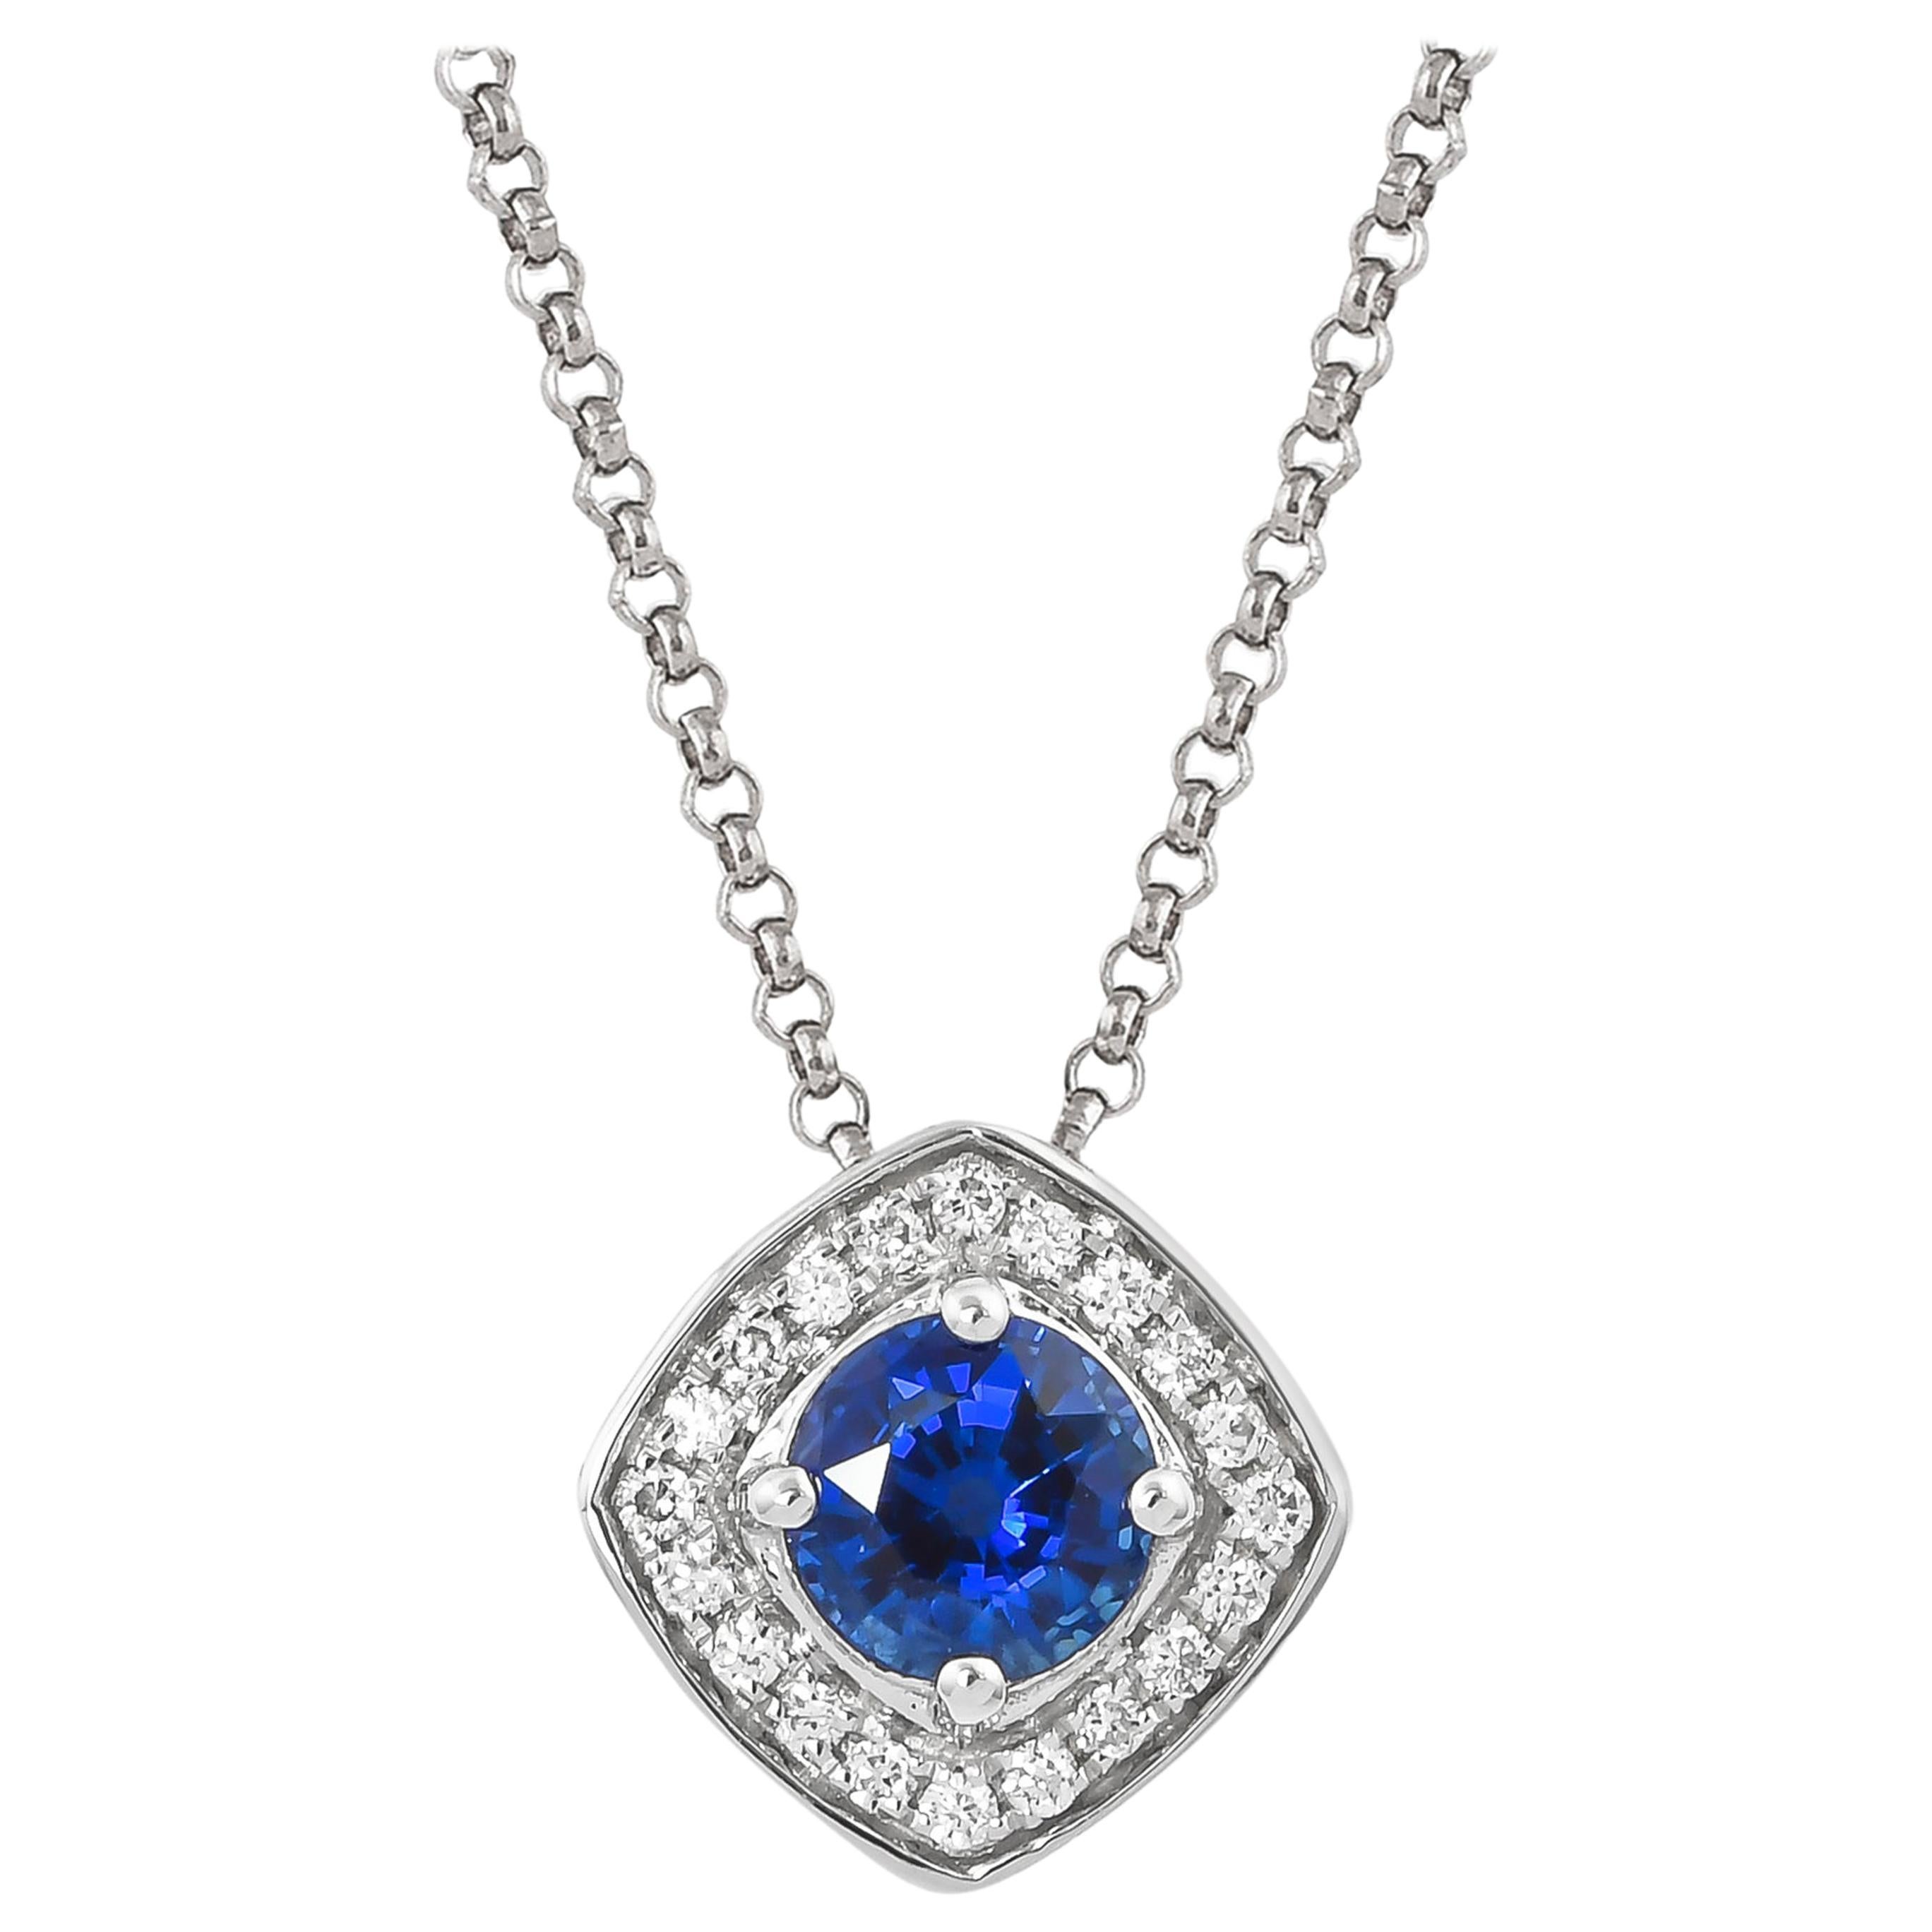 0.5 Carat Blue Sapphire and Diamond Pendant with Chain in 18 Karat White Gold